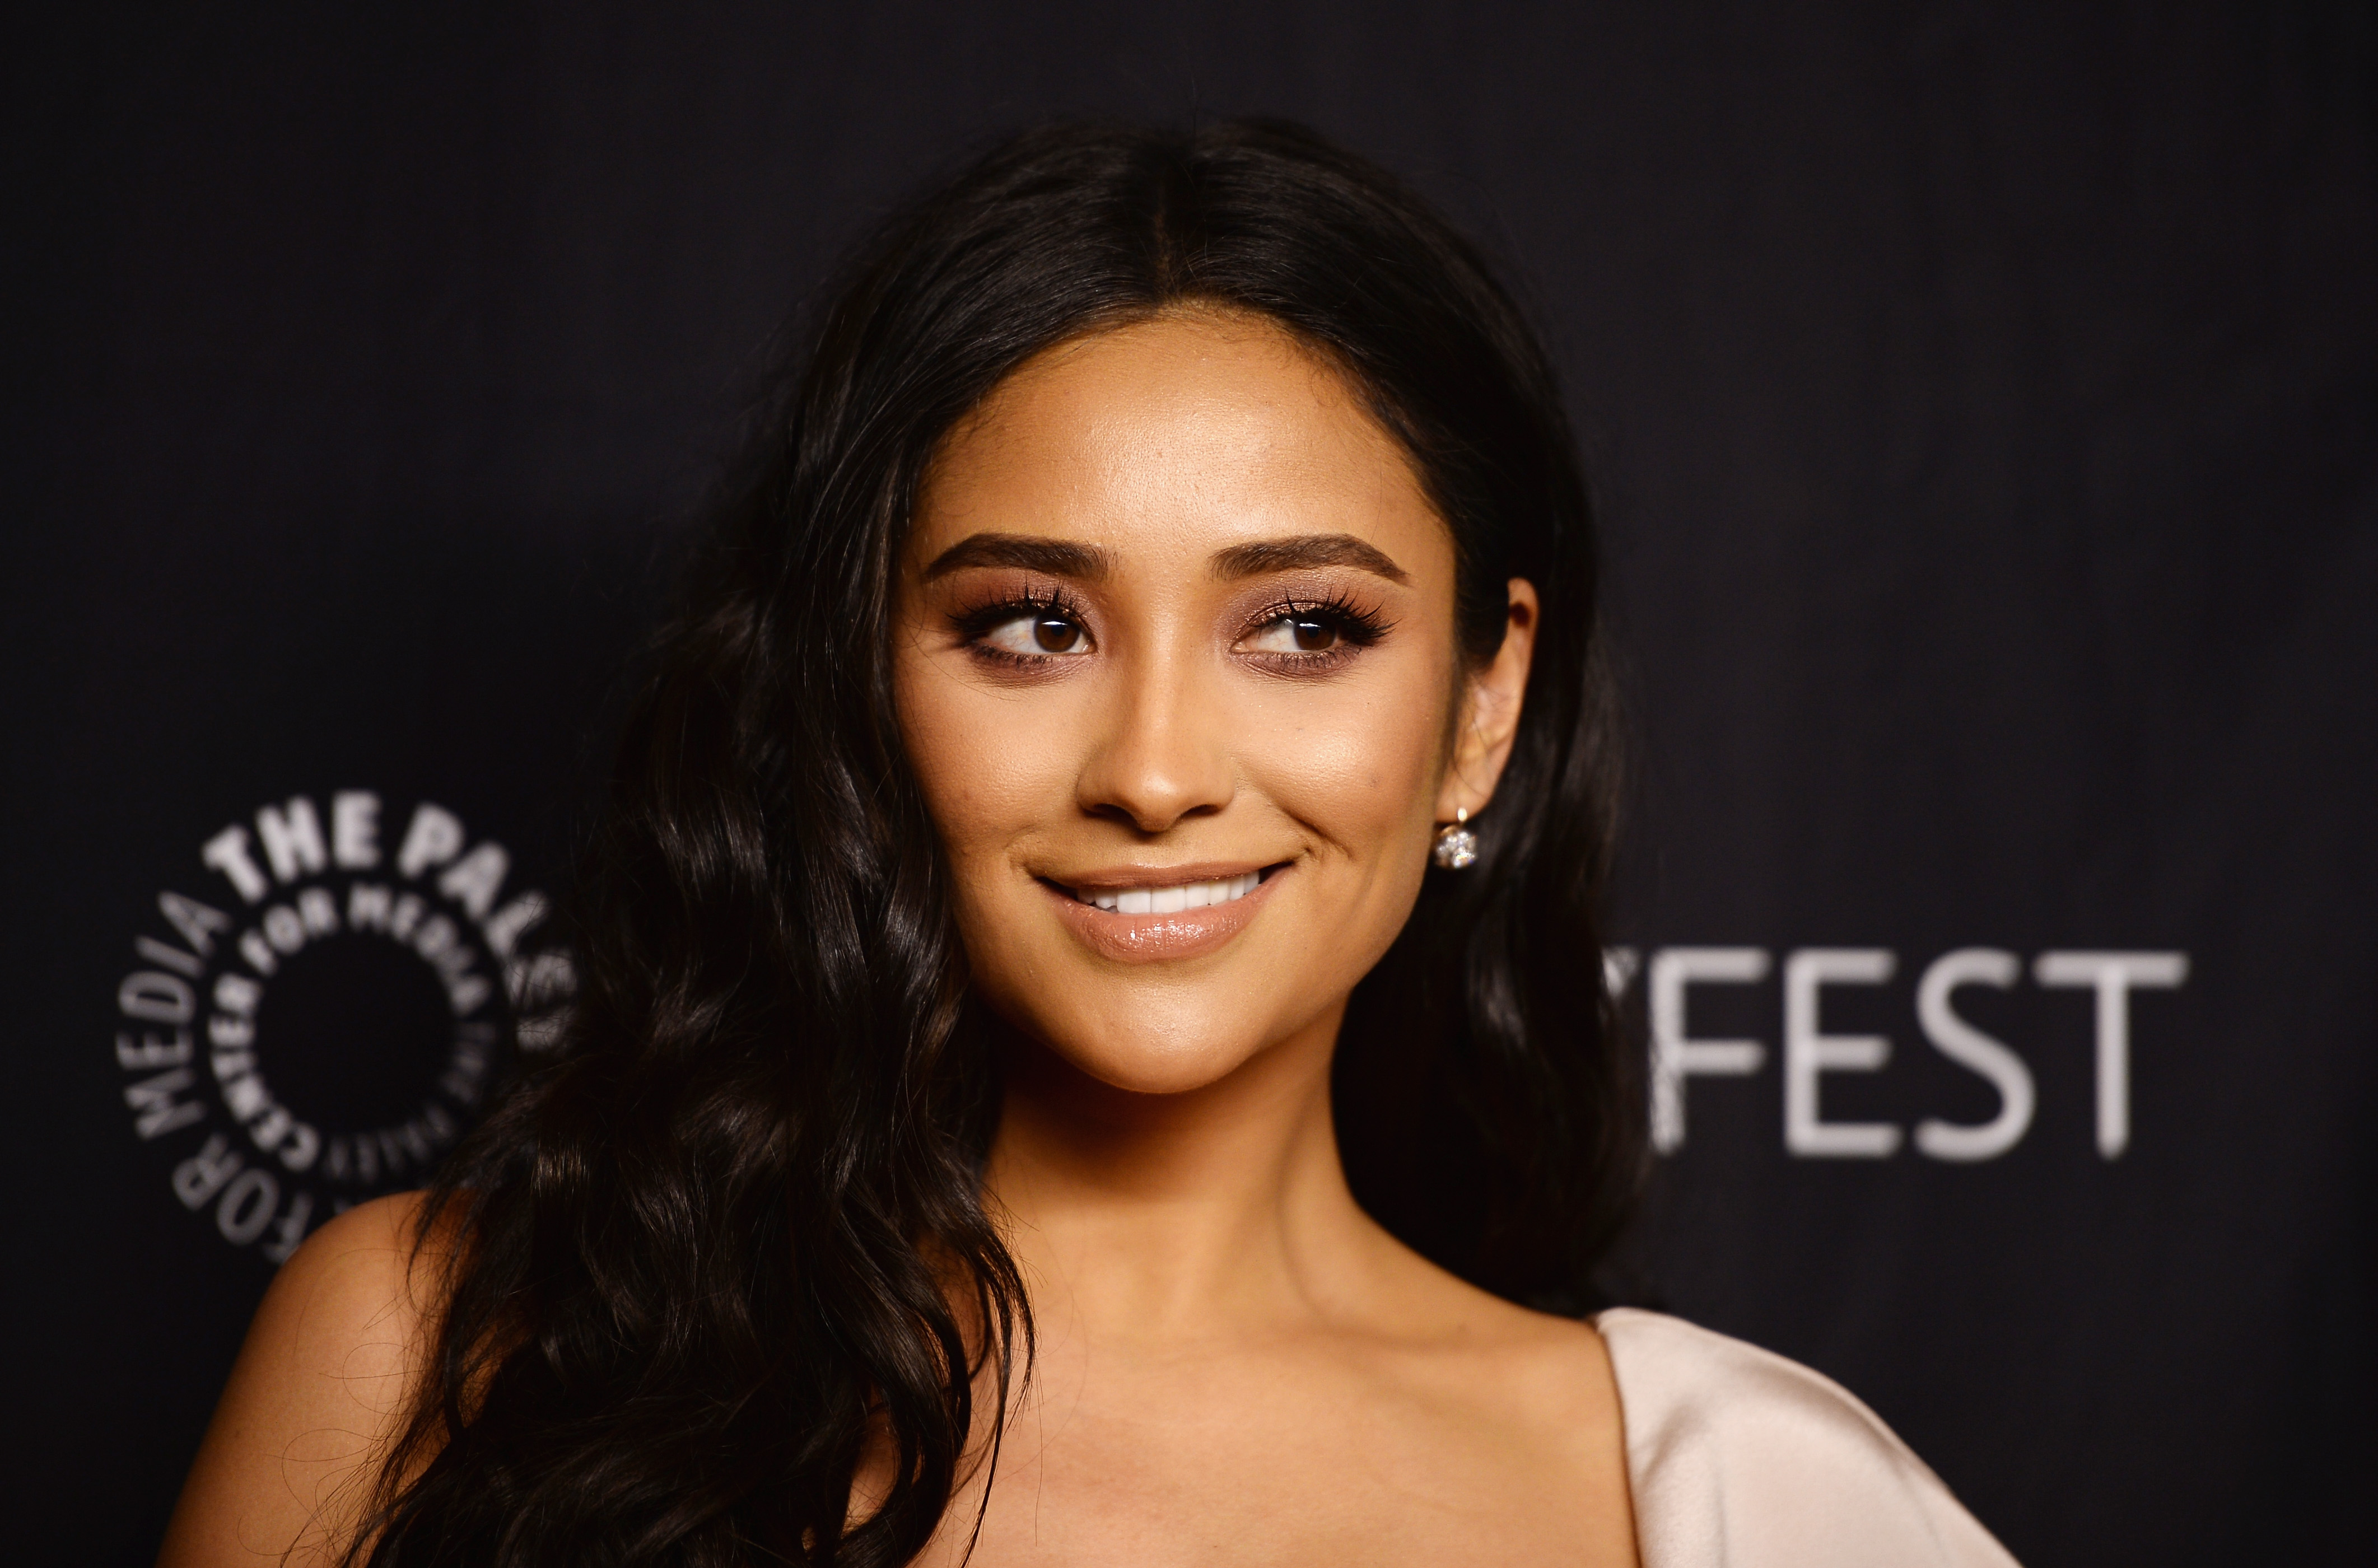 HOLLYWOOD, CA - MARCH 25:  Actress Shay Mitchell attends The Paley Center For Media's 34th Annual PaleyFest Los Angeles - "Pretty Little Liars" screening and panel at the Dolby Theatre on March 25, 2017 in Hollywood, California.  (Photo by Amanda Edwards/WireImage) (Amanda Edwards—WireImage)